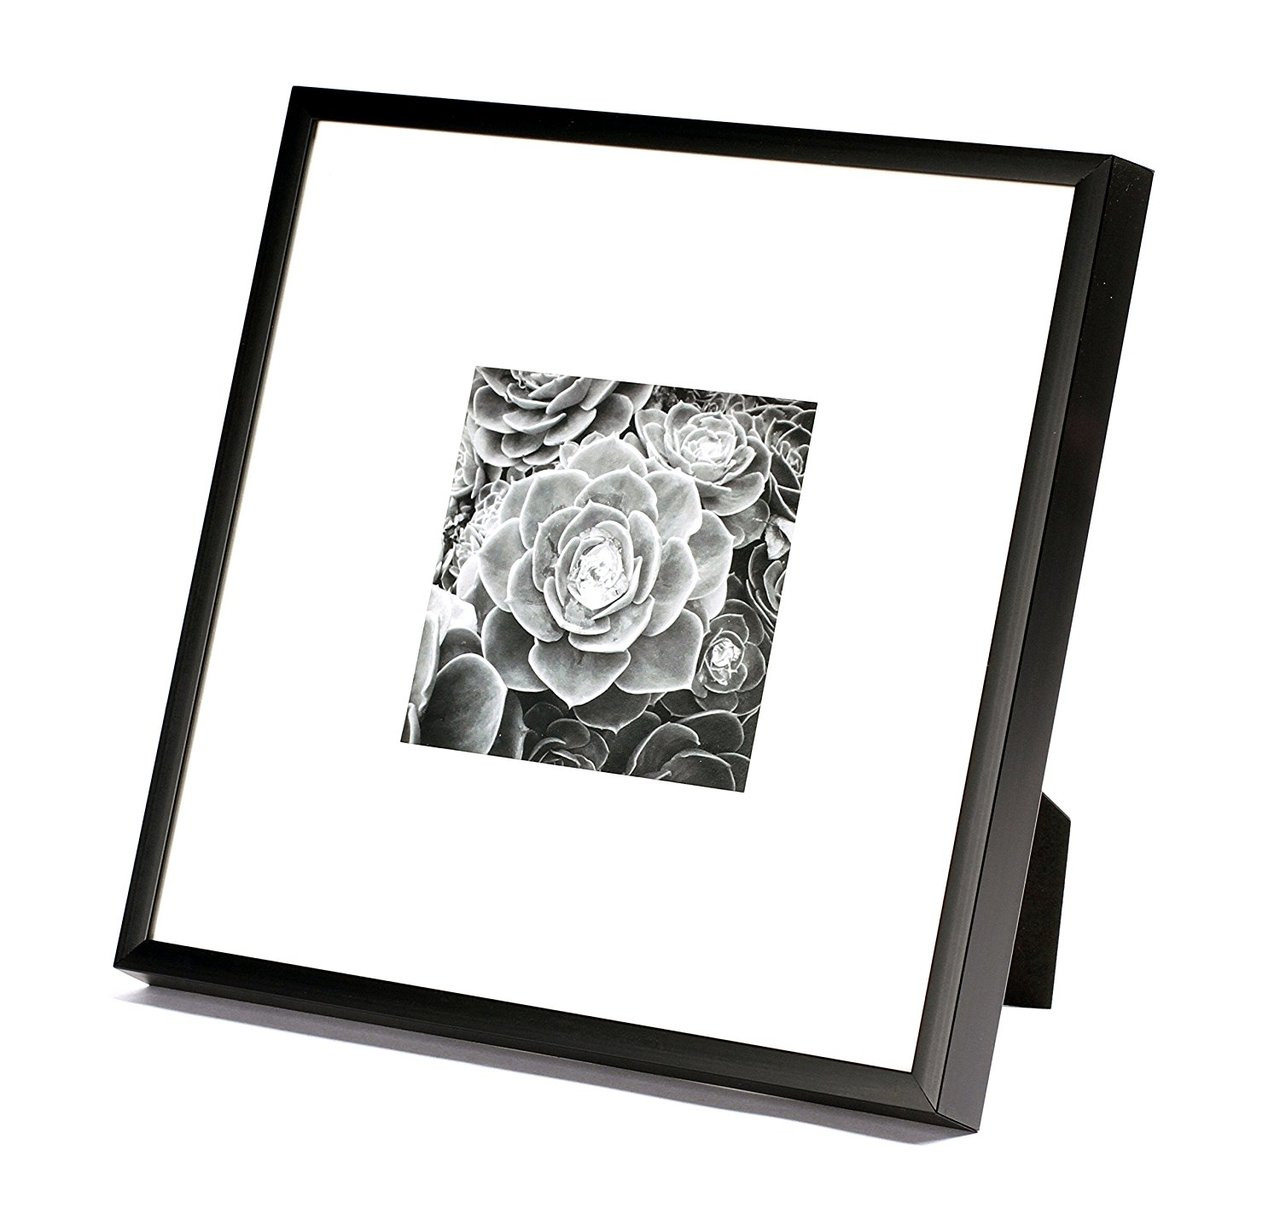 8x8 for 5x5 4x4 Picture Frames Hoxton Black Photo Frame Square